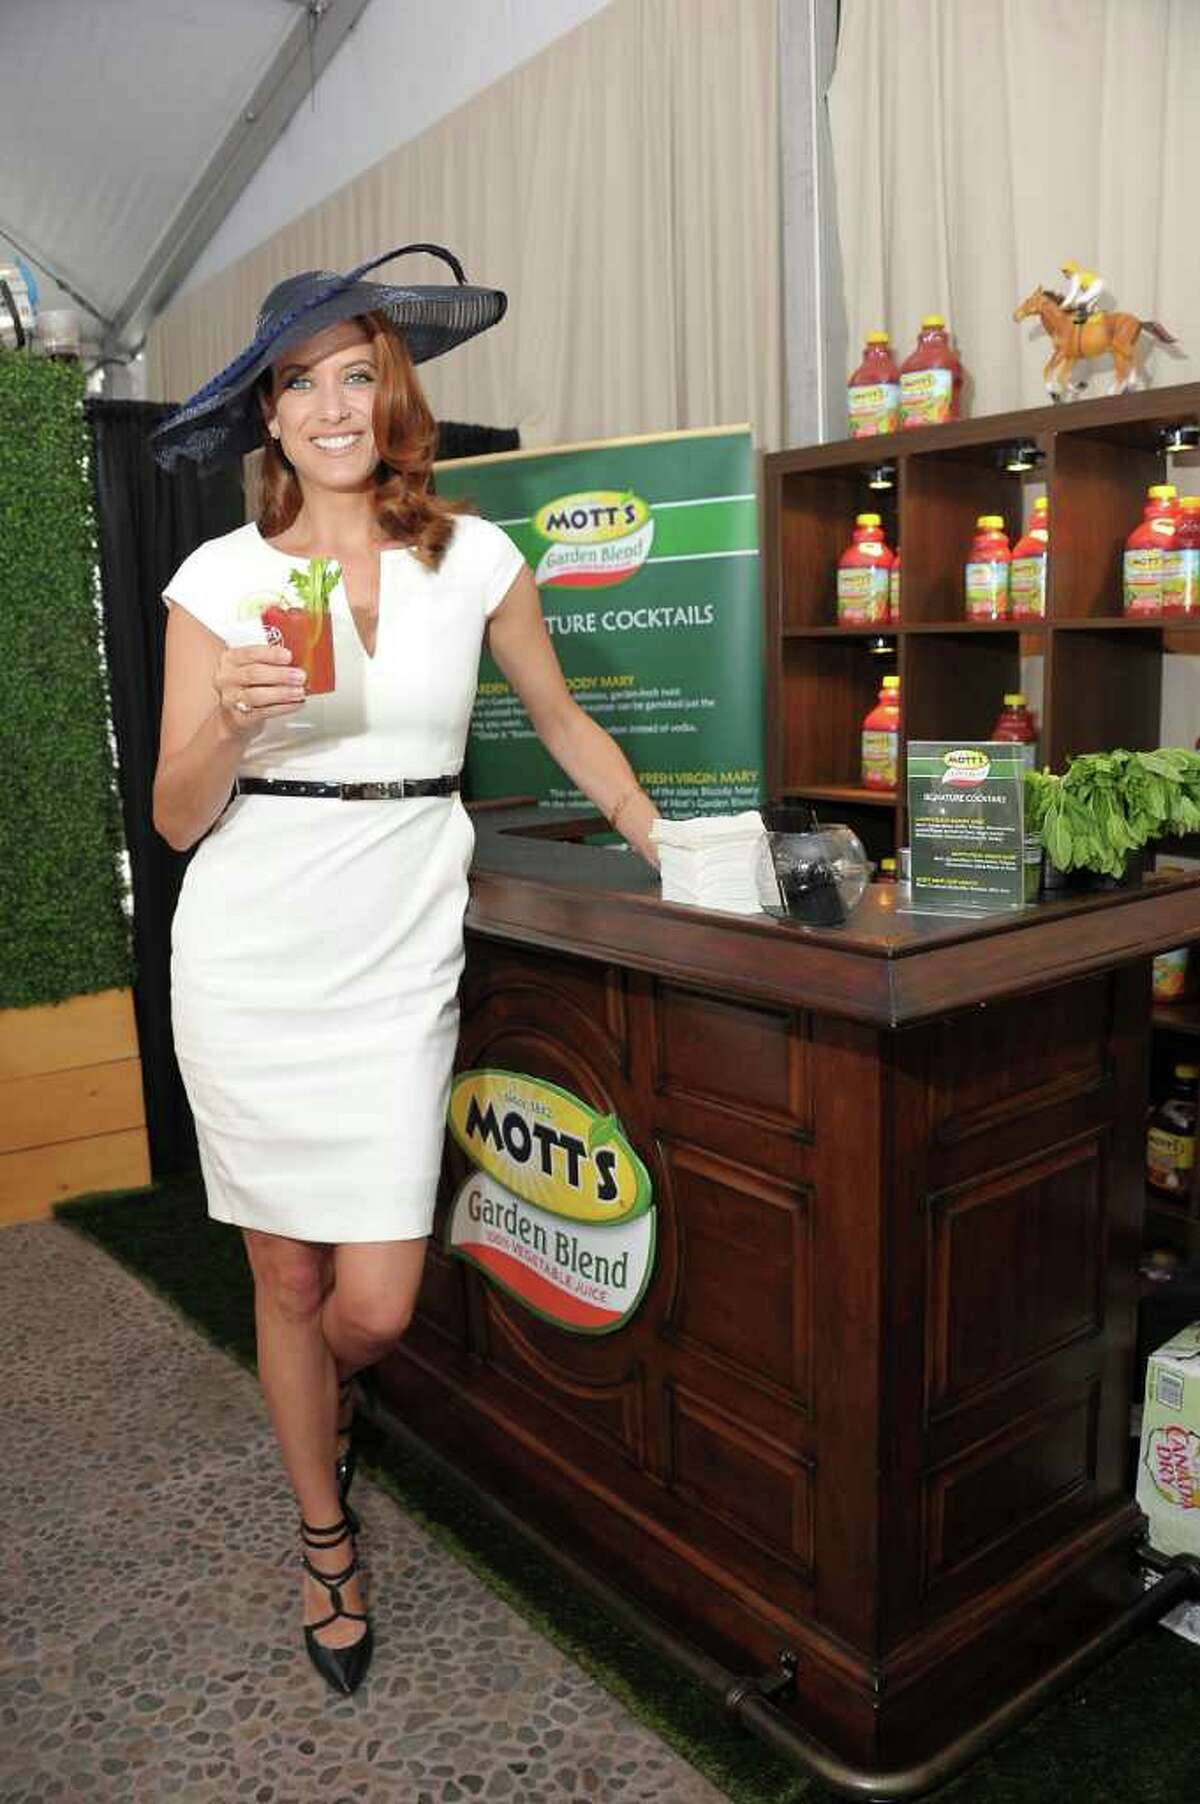 Actress Kate Walsh visits the Mott's Garden Blend VIP suite at the 137th Kentucky Derby at Churchill Downs on May 7, 2011 in Louisville, Kentucky. (Photo by Michael Loccisano/Getty Images) *** Local Caption *** Kate Walsh;